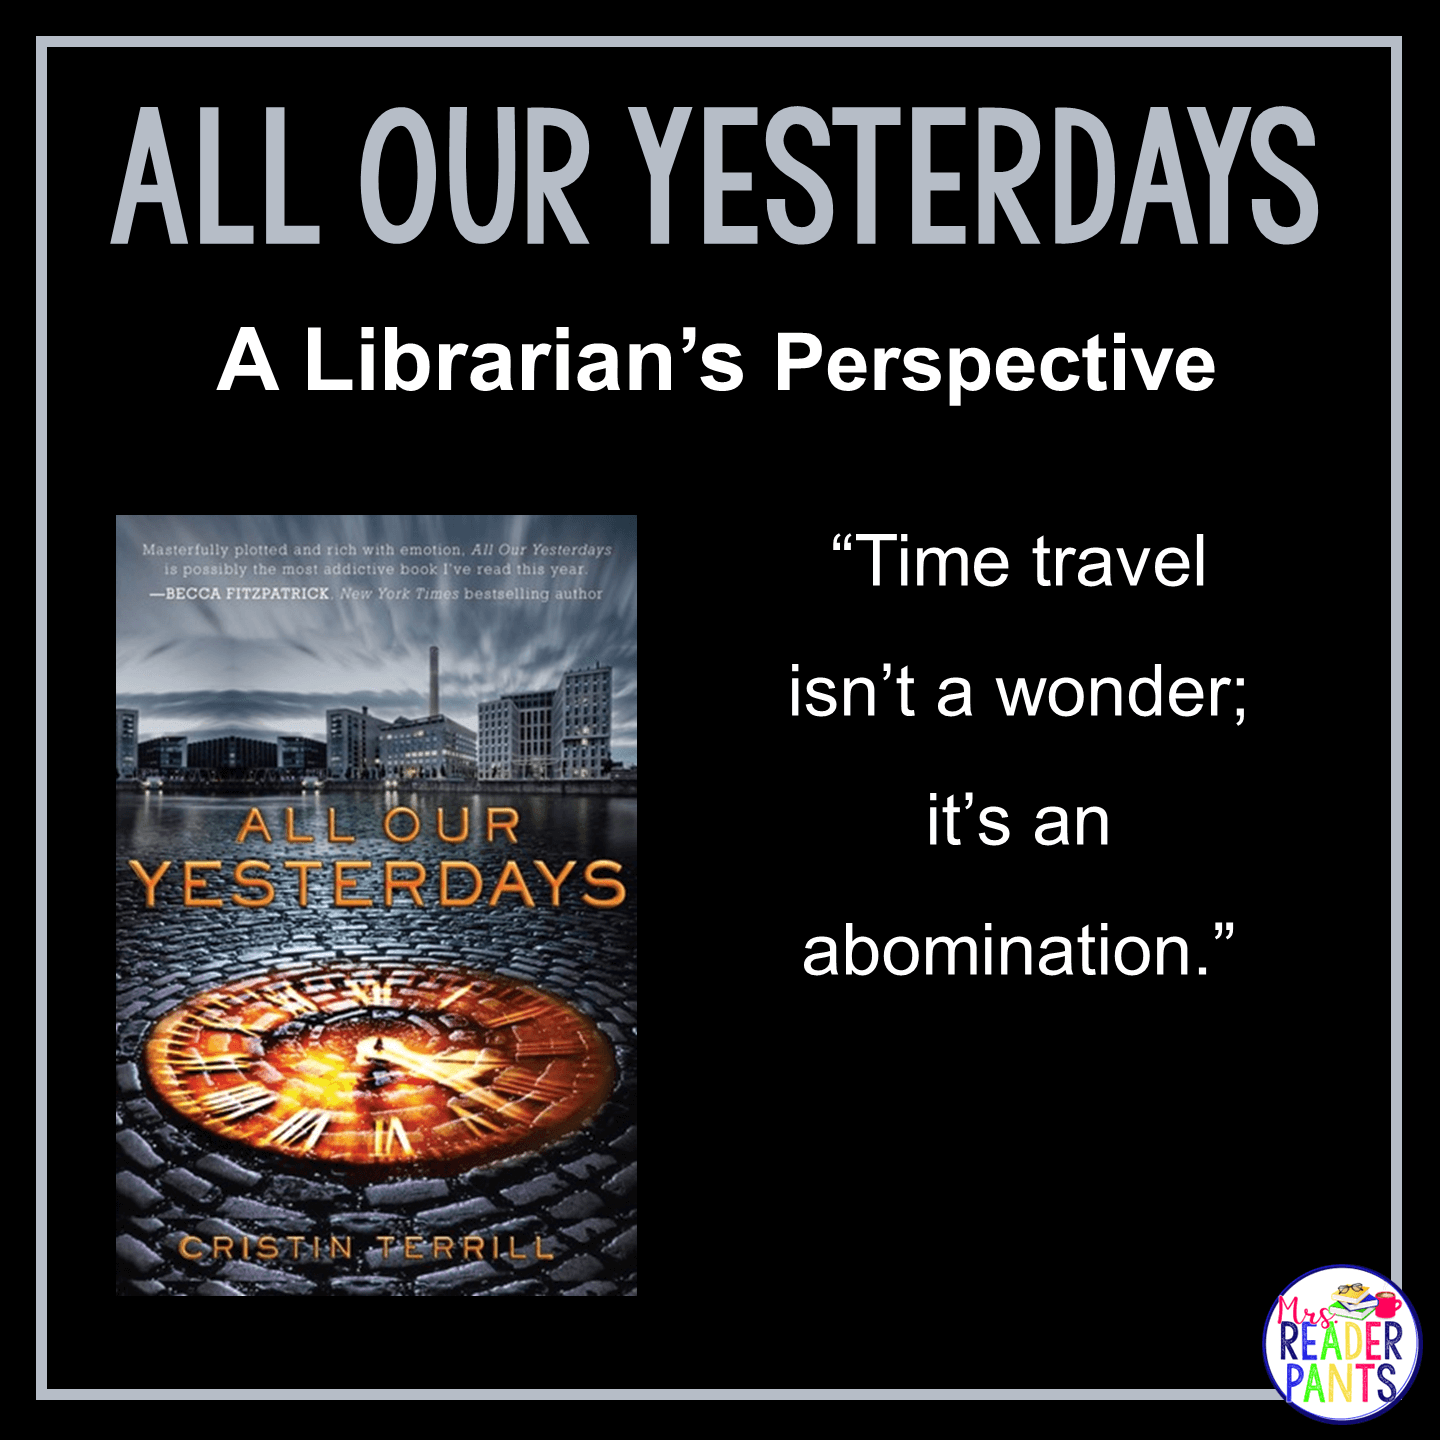 This is a Librarian's Perspective Review of All Our Yesterdays by Cristin Terrill.